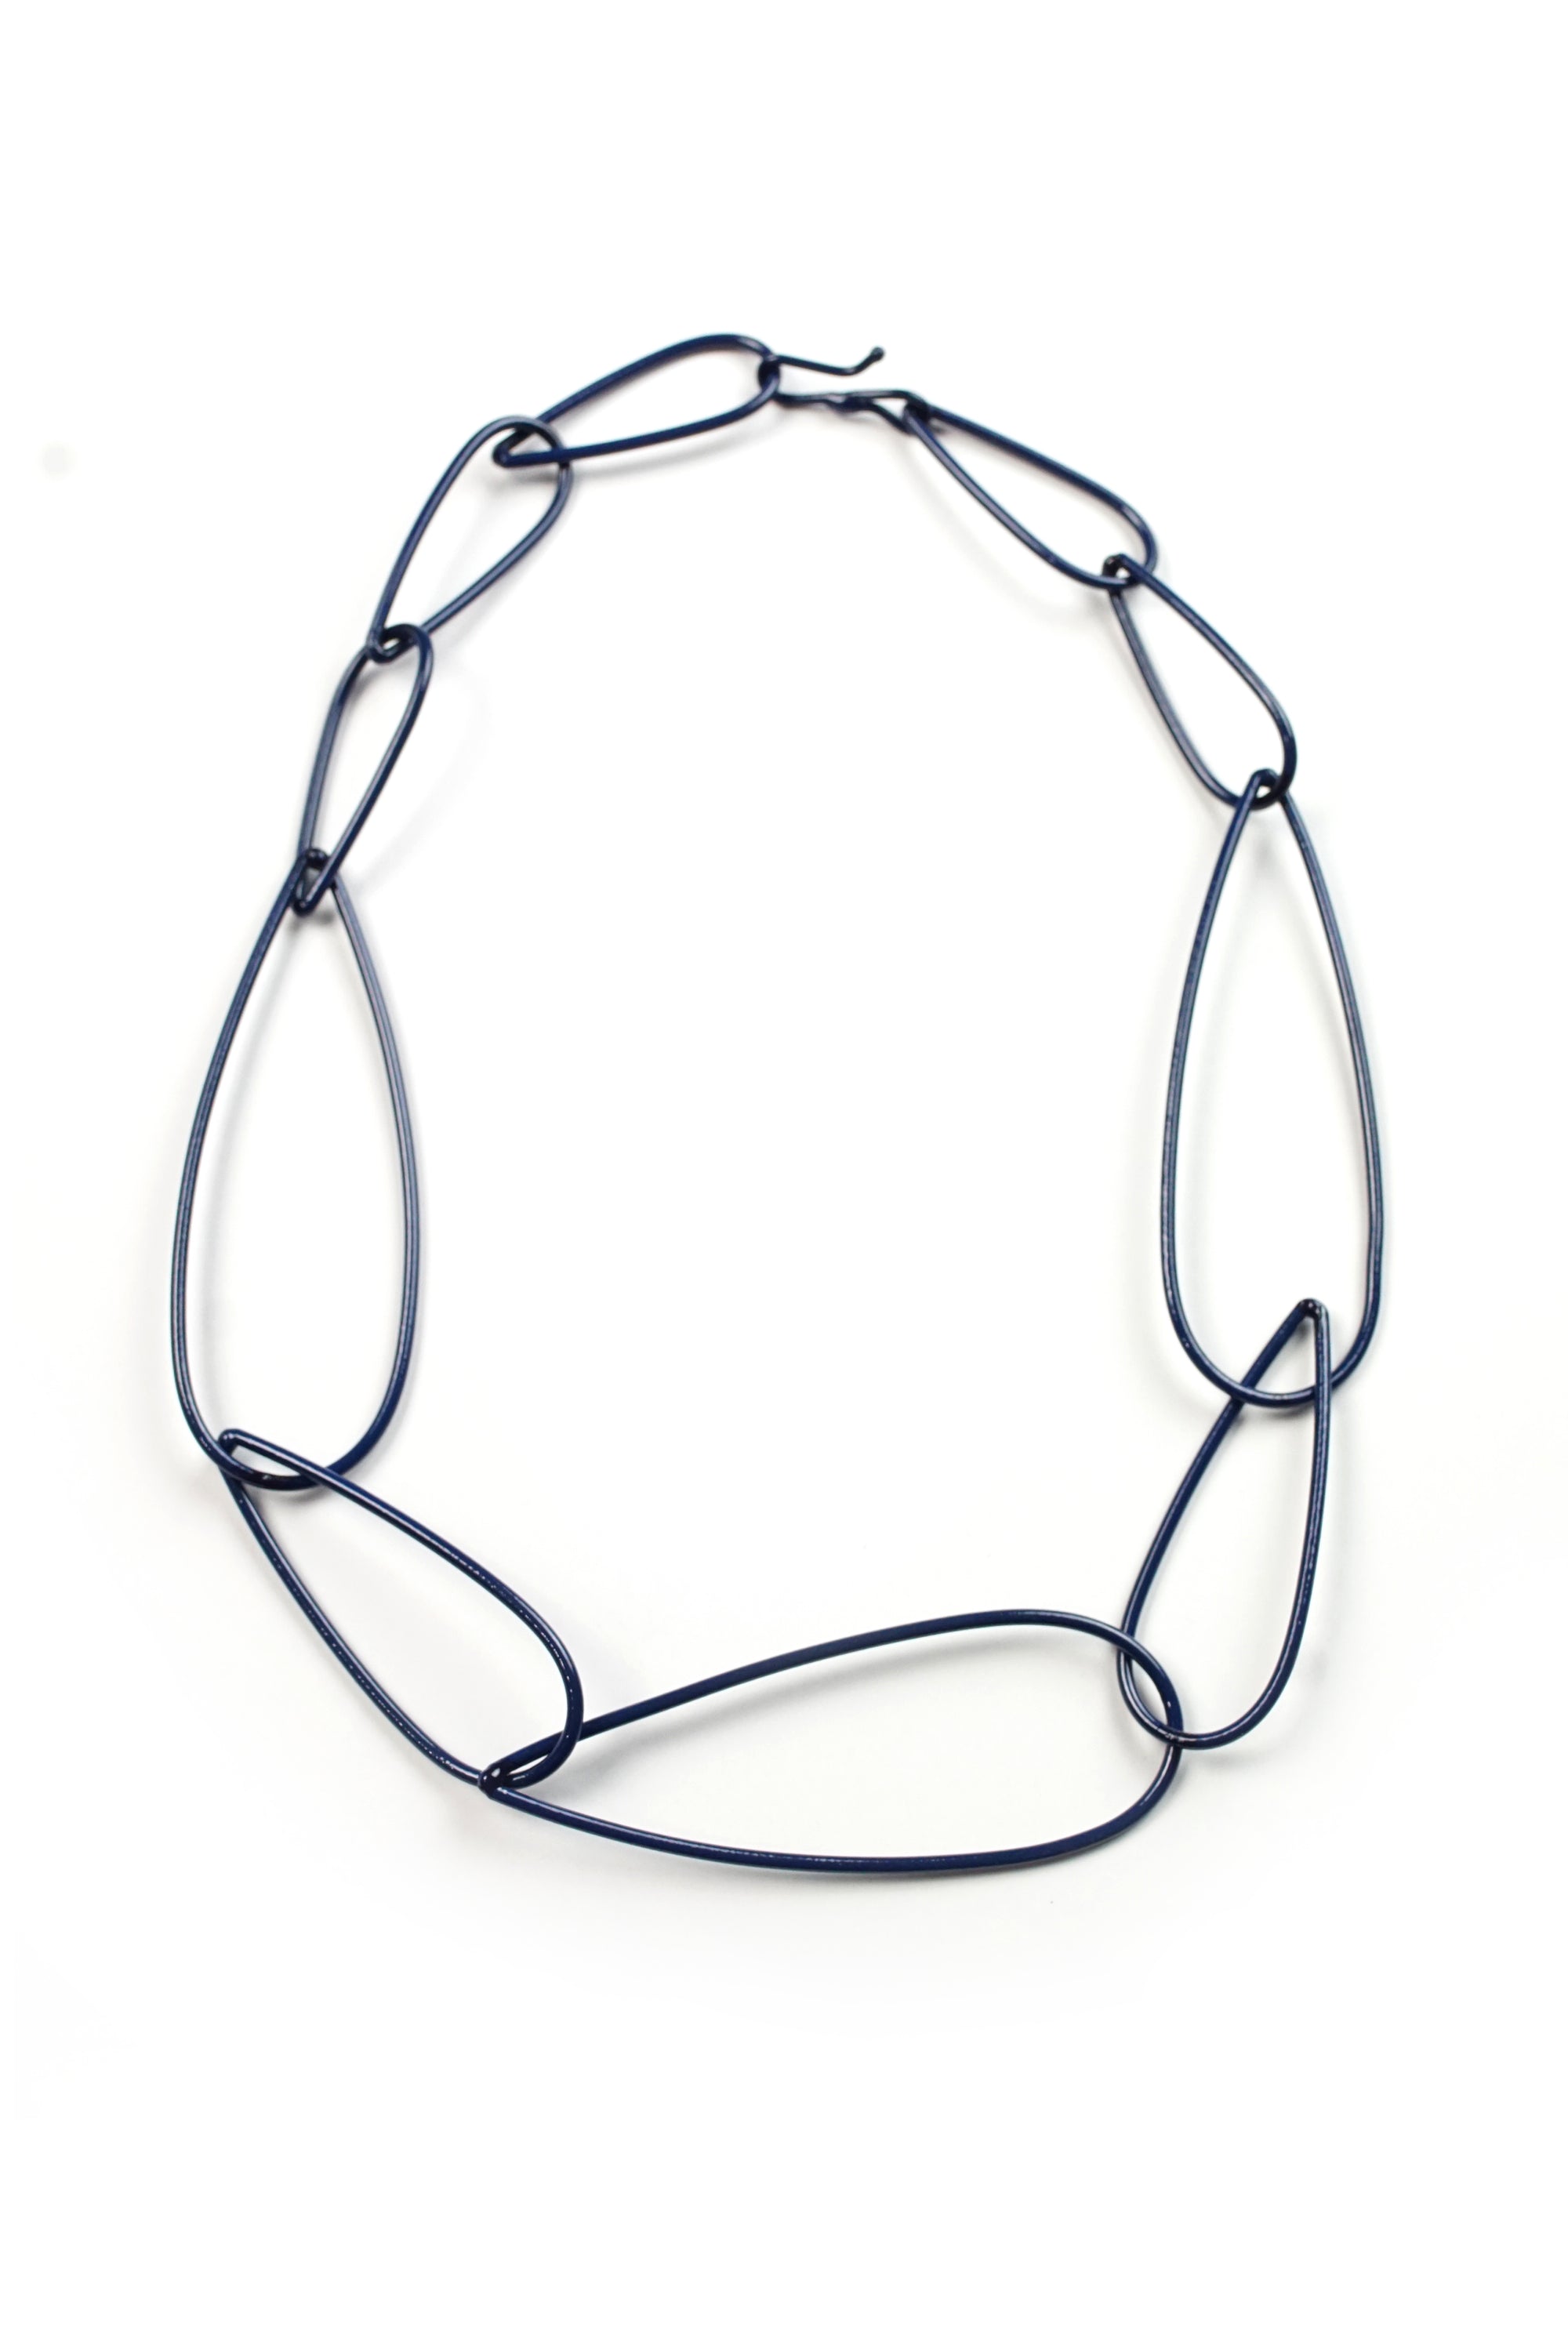 Modular Necklace No. 6 in Blue Sapphire